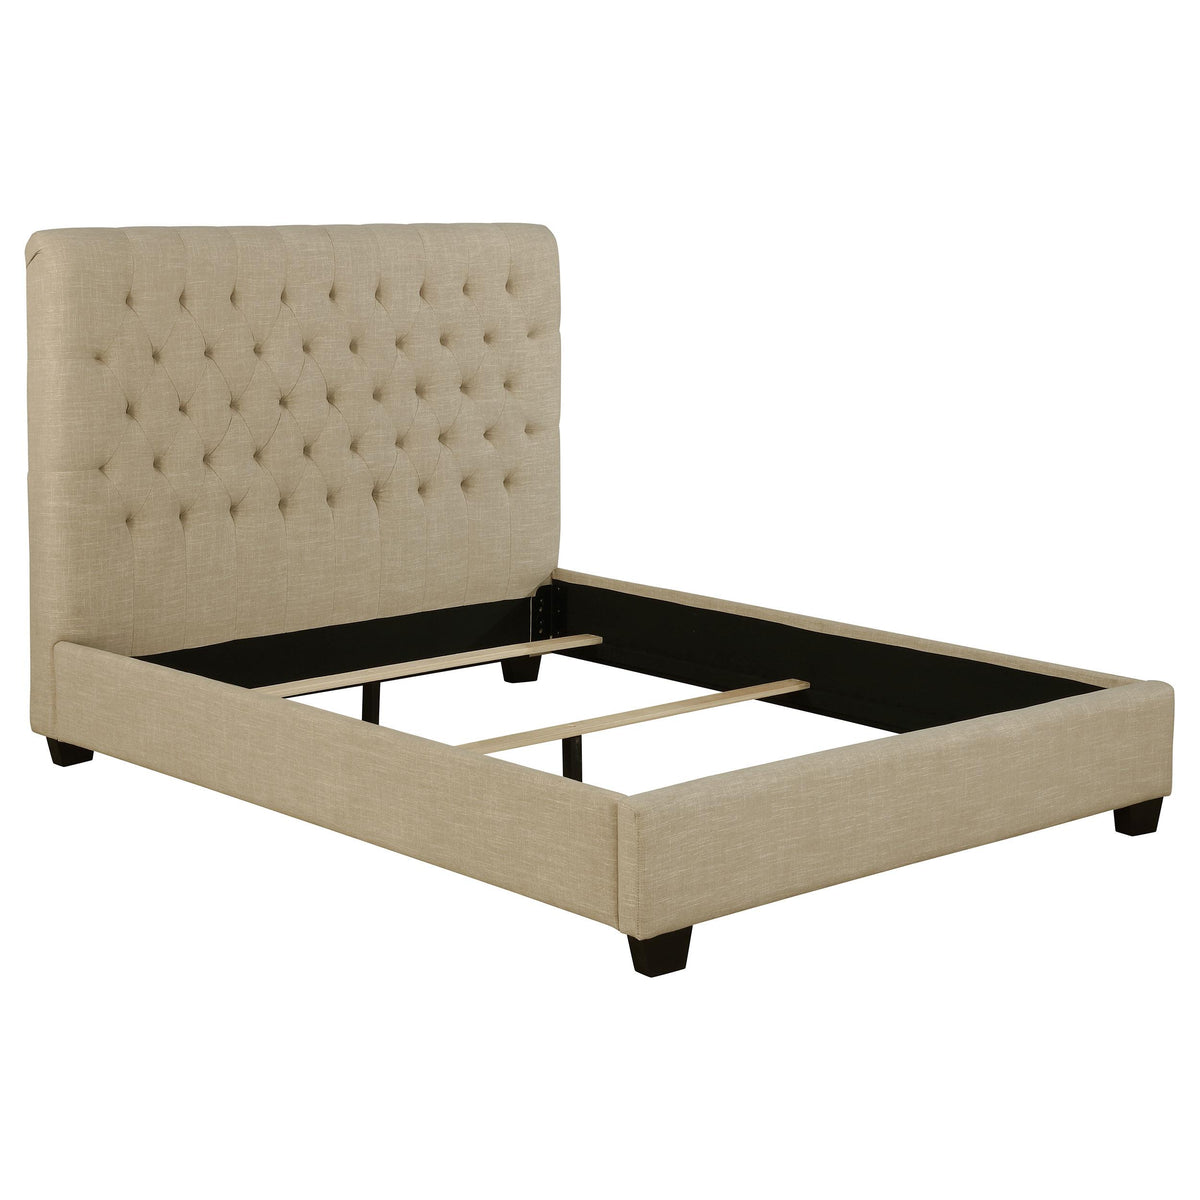 Chloe Tufted Upholstered California King Bed Oatmeal  Half Price Furniture